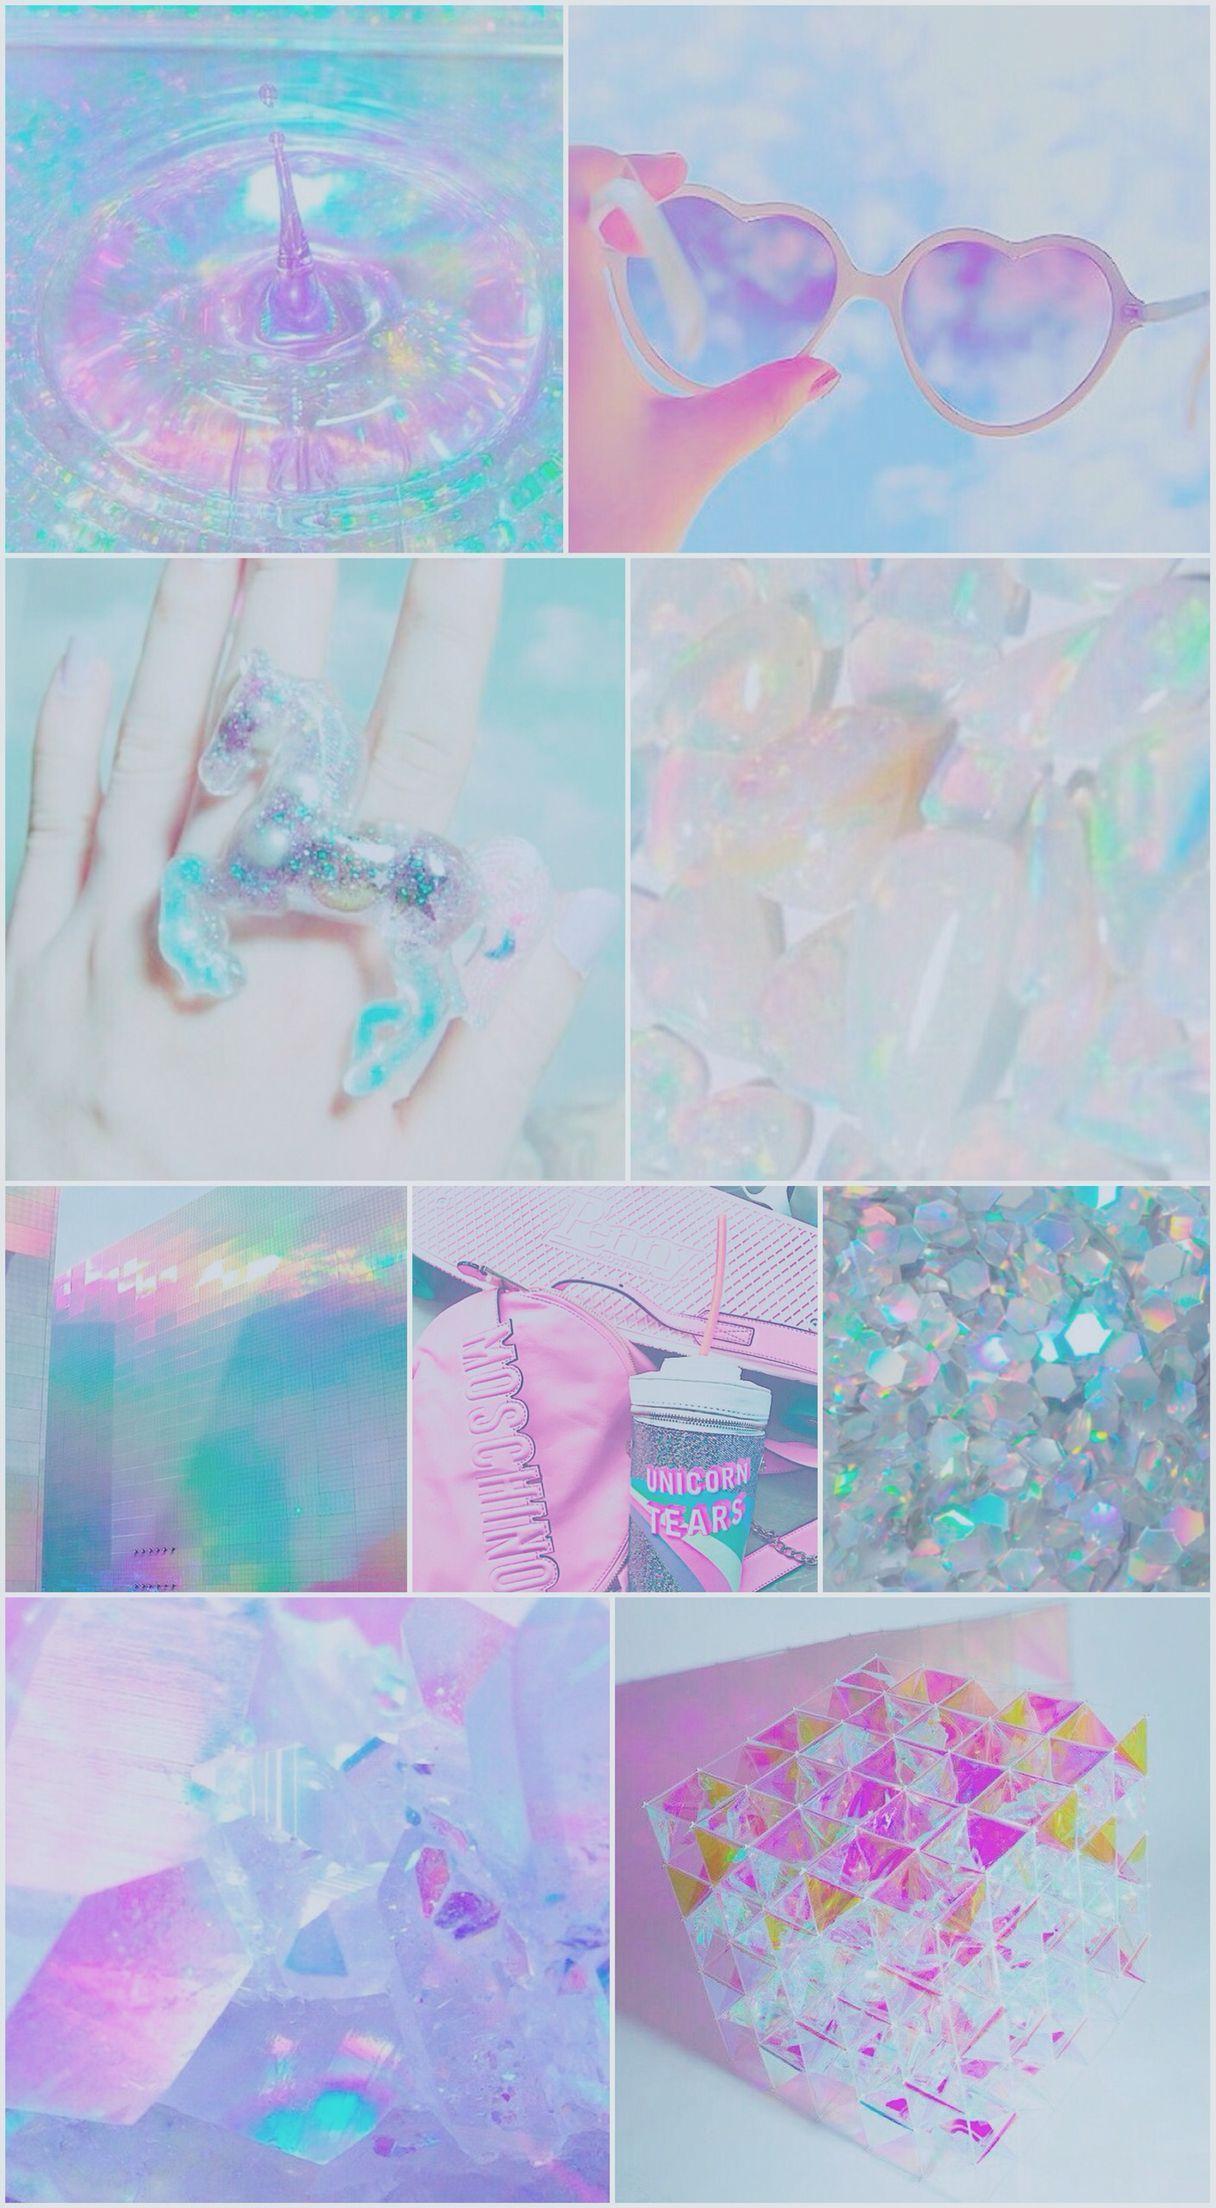 iridescent, wallpaper, background, iPhone, android, unicorn, blue